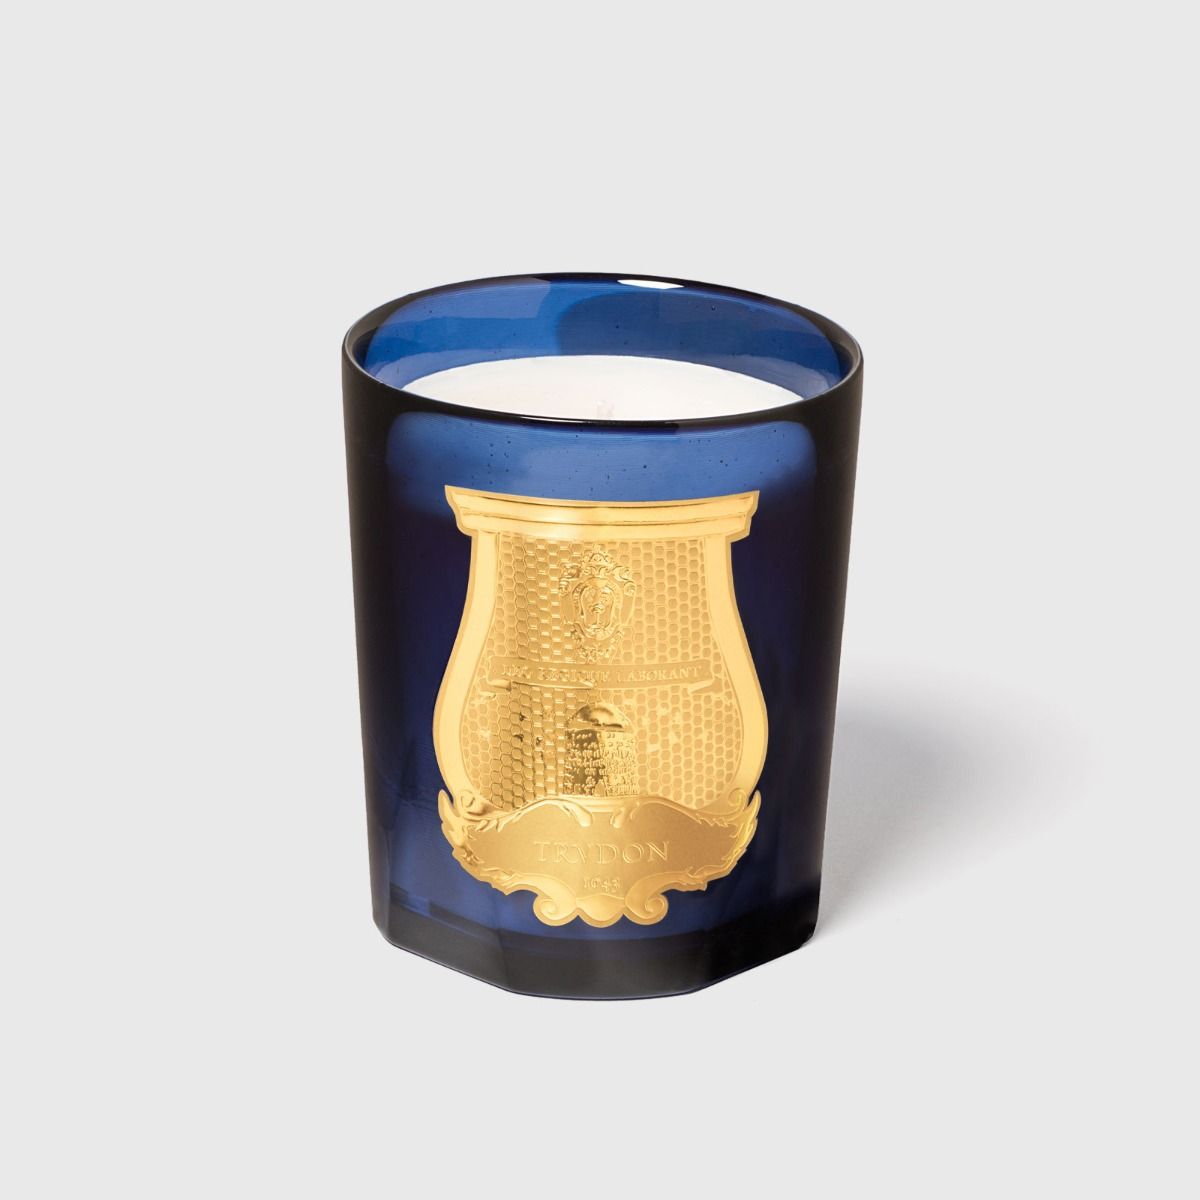 Trudon | Maduraï Scented Candle